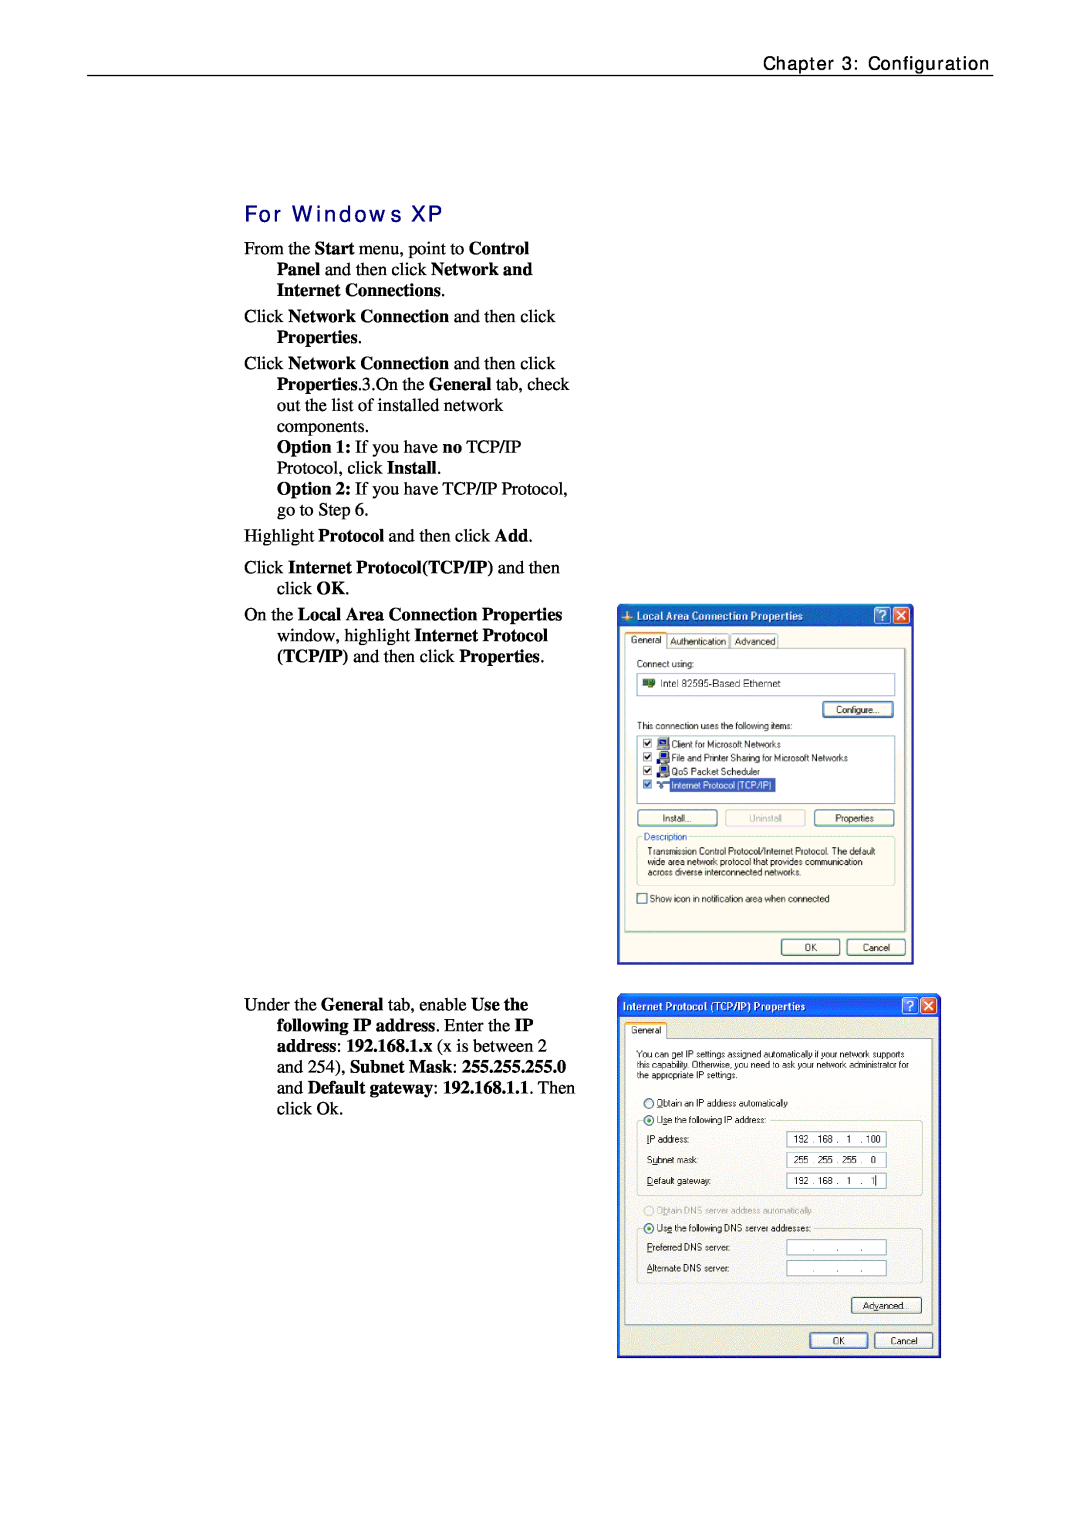 Siemens CL-010-I manual For Windows XP, Panel and then click Network and Internet Connections, Properties 